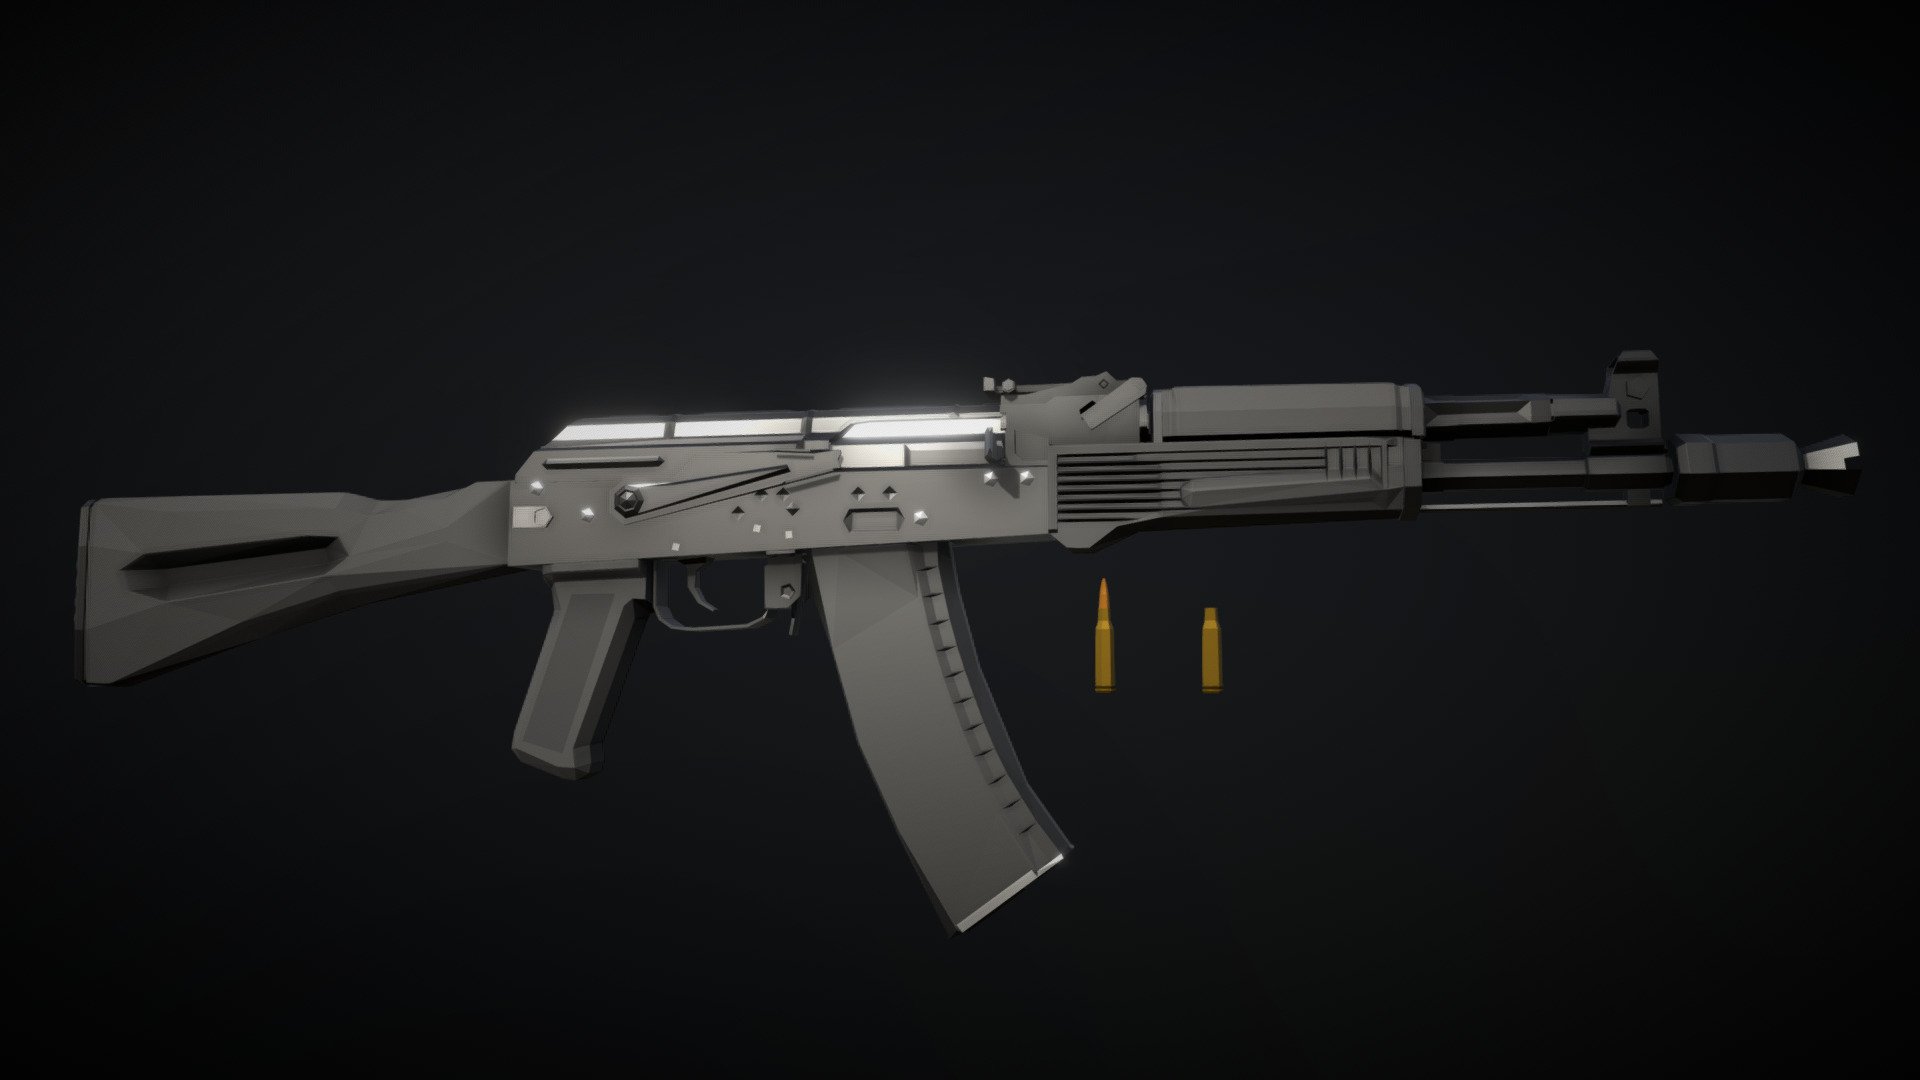 Low-Poly model of the AK-105, the carbine variant of the AK-74m, with a barrel cut down to the gas block, and a muzzle brake very similar to the AKS-74U - Low-Poly AK-105 - Download Free 3D model by notcplkerry 3d model